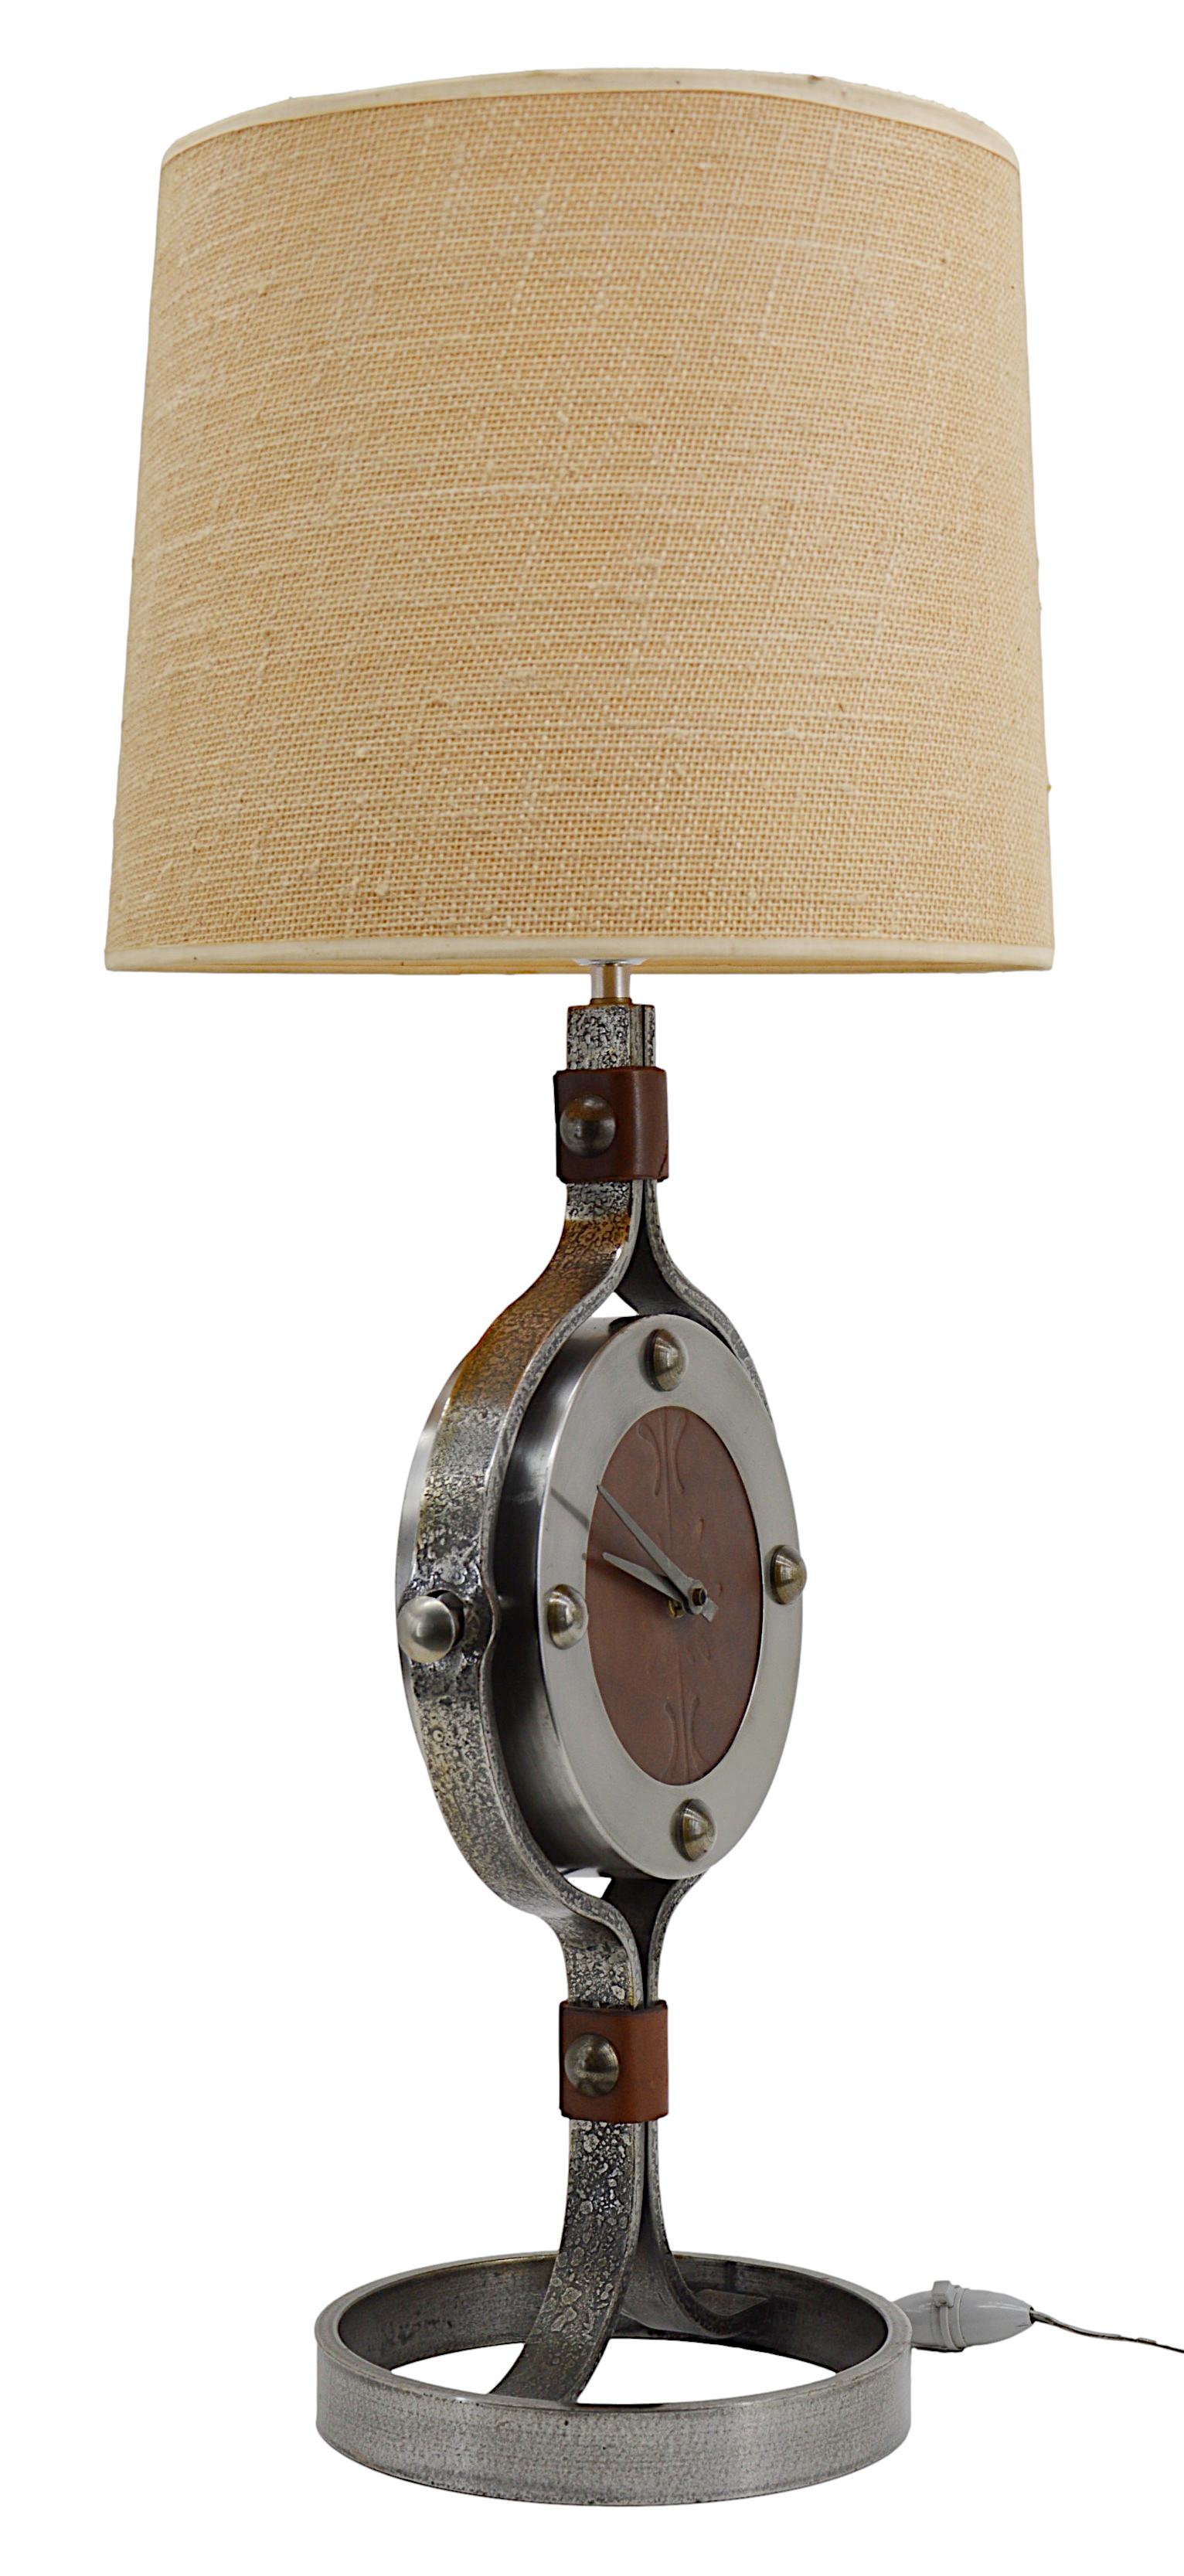 French Jean-Pierre Ryckaert Large Midcentury Clock Lamp, circa 1950 For Sale